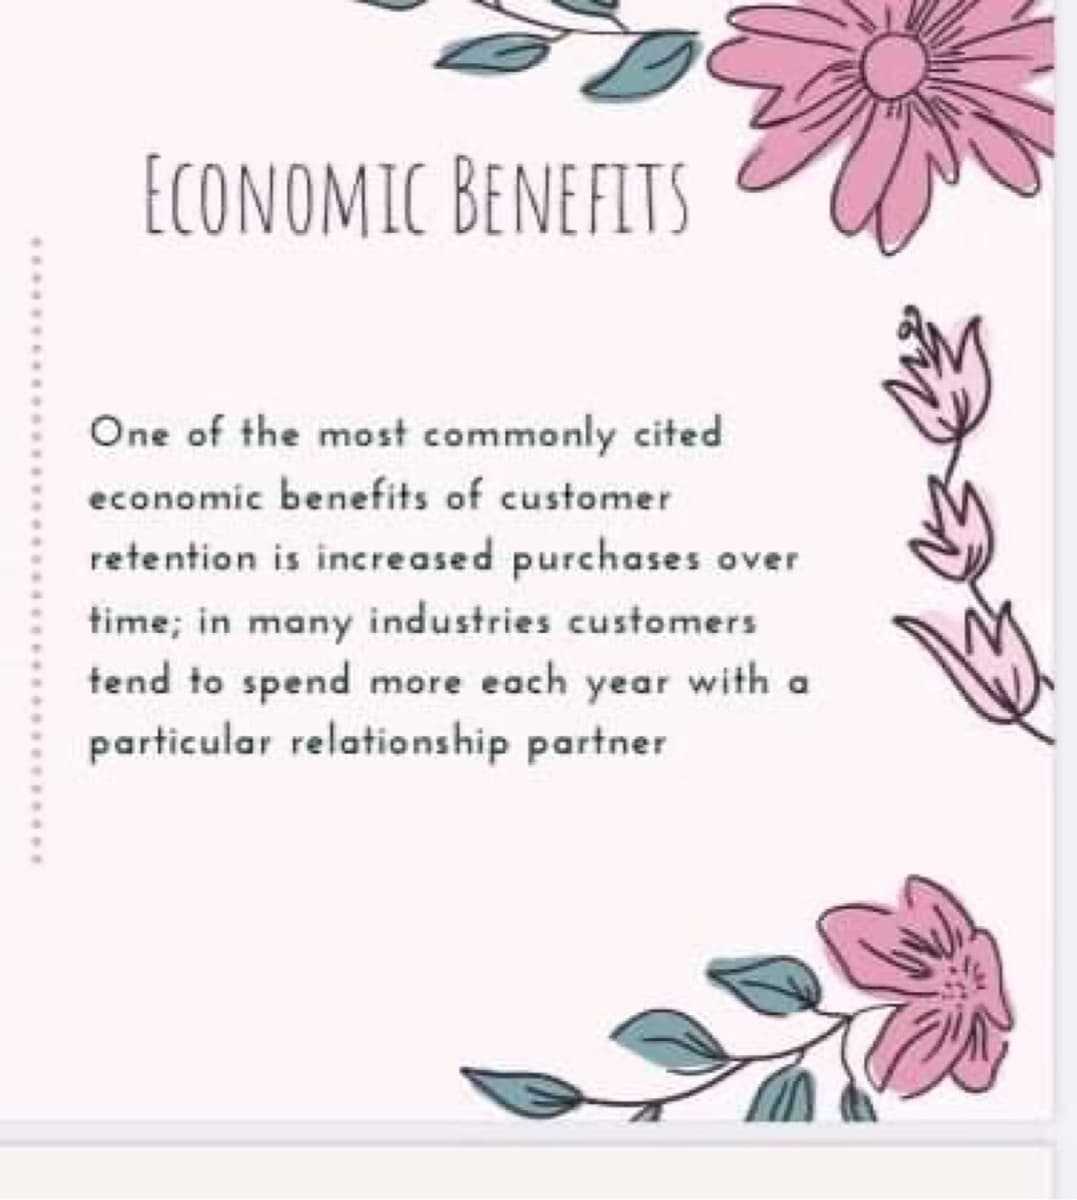 ECONOMIC BENEFITS
One of the most commonly cited
economic benefits of customer
retention is increased purchases over
time; in many industries customers
tend to spend more each year with a
particular relationship partner
